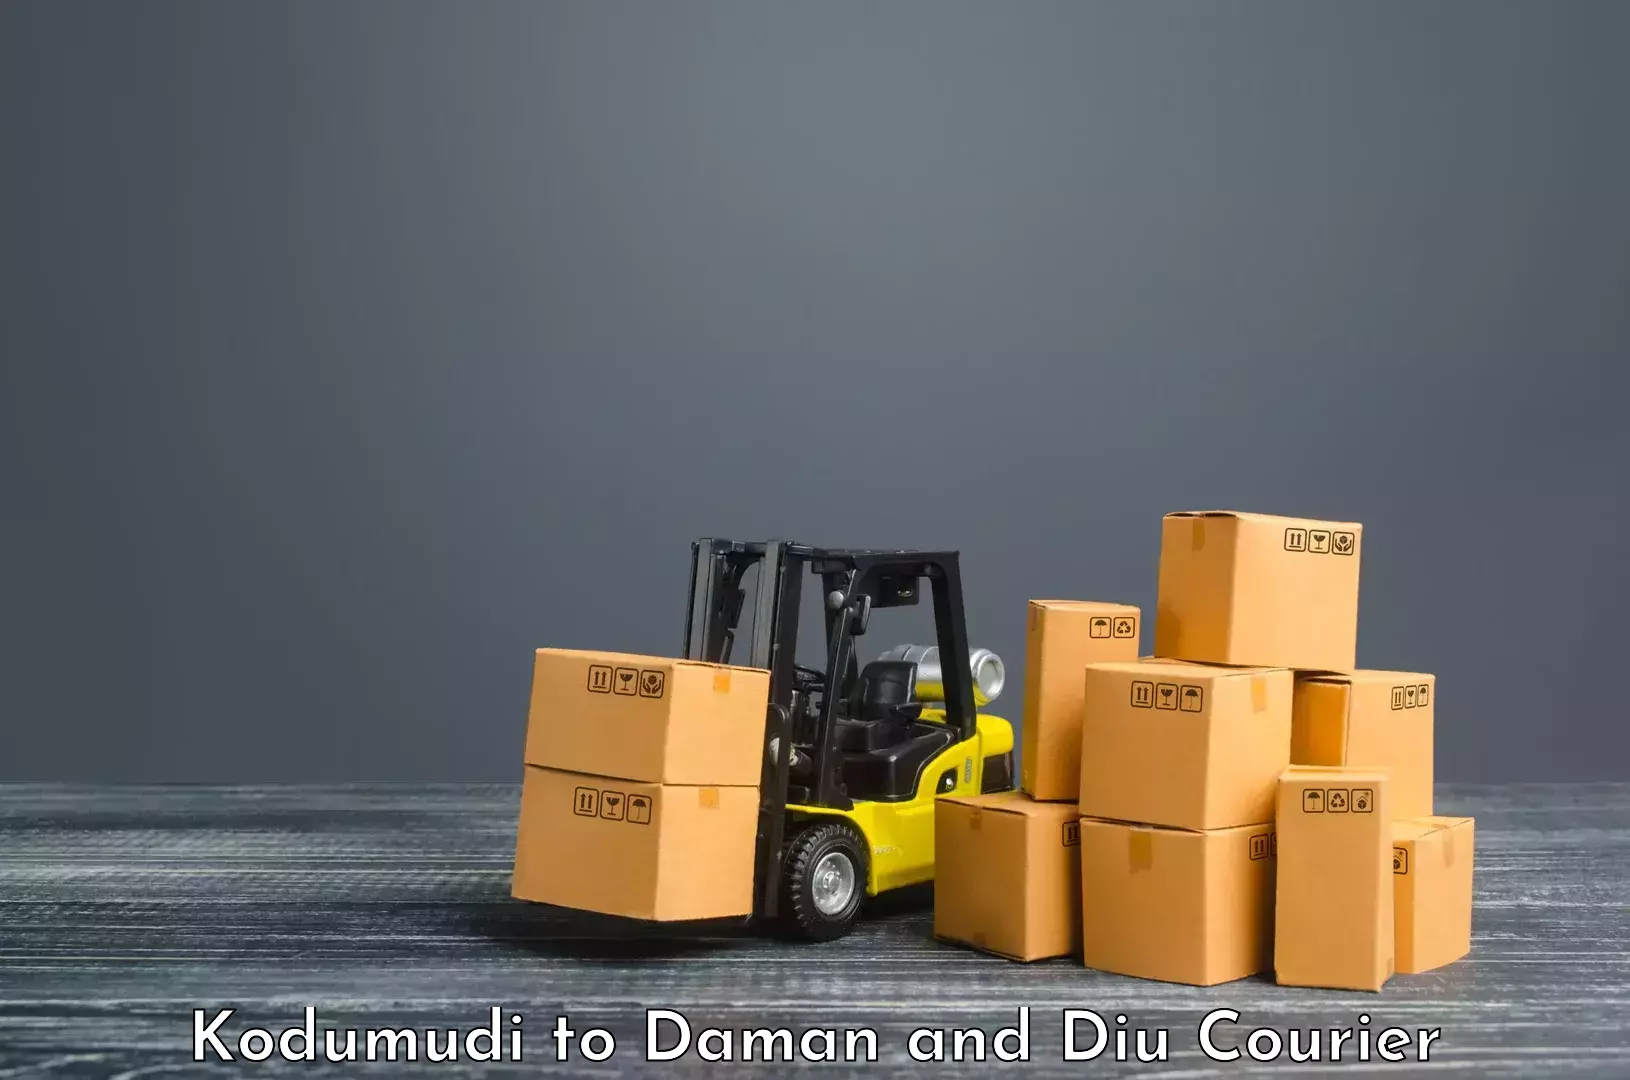 State-of-the-art courier technology Kodumudi to Daman and Diu